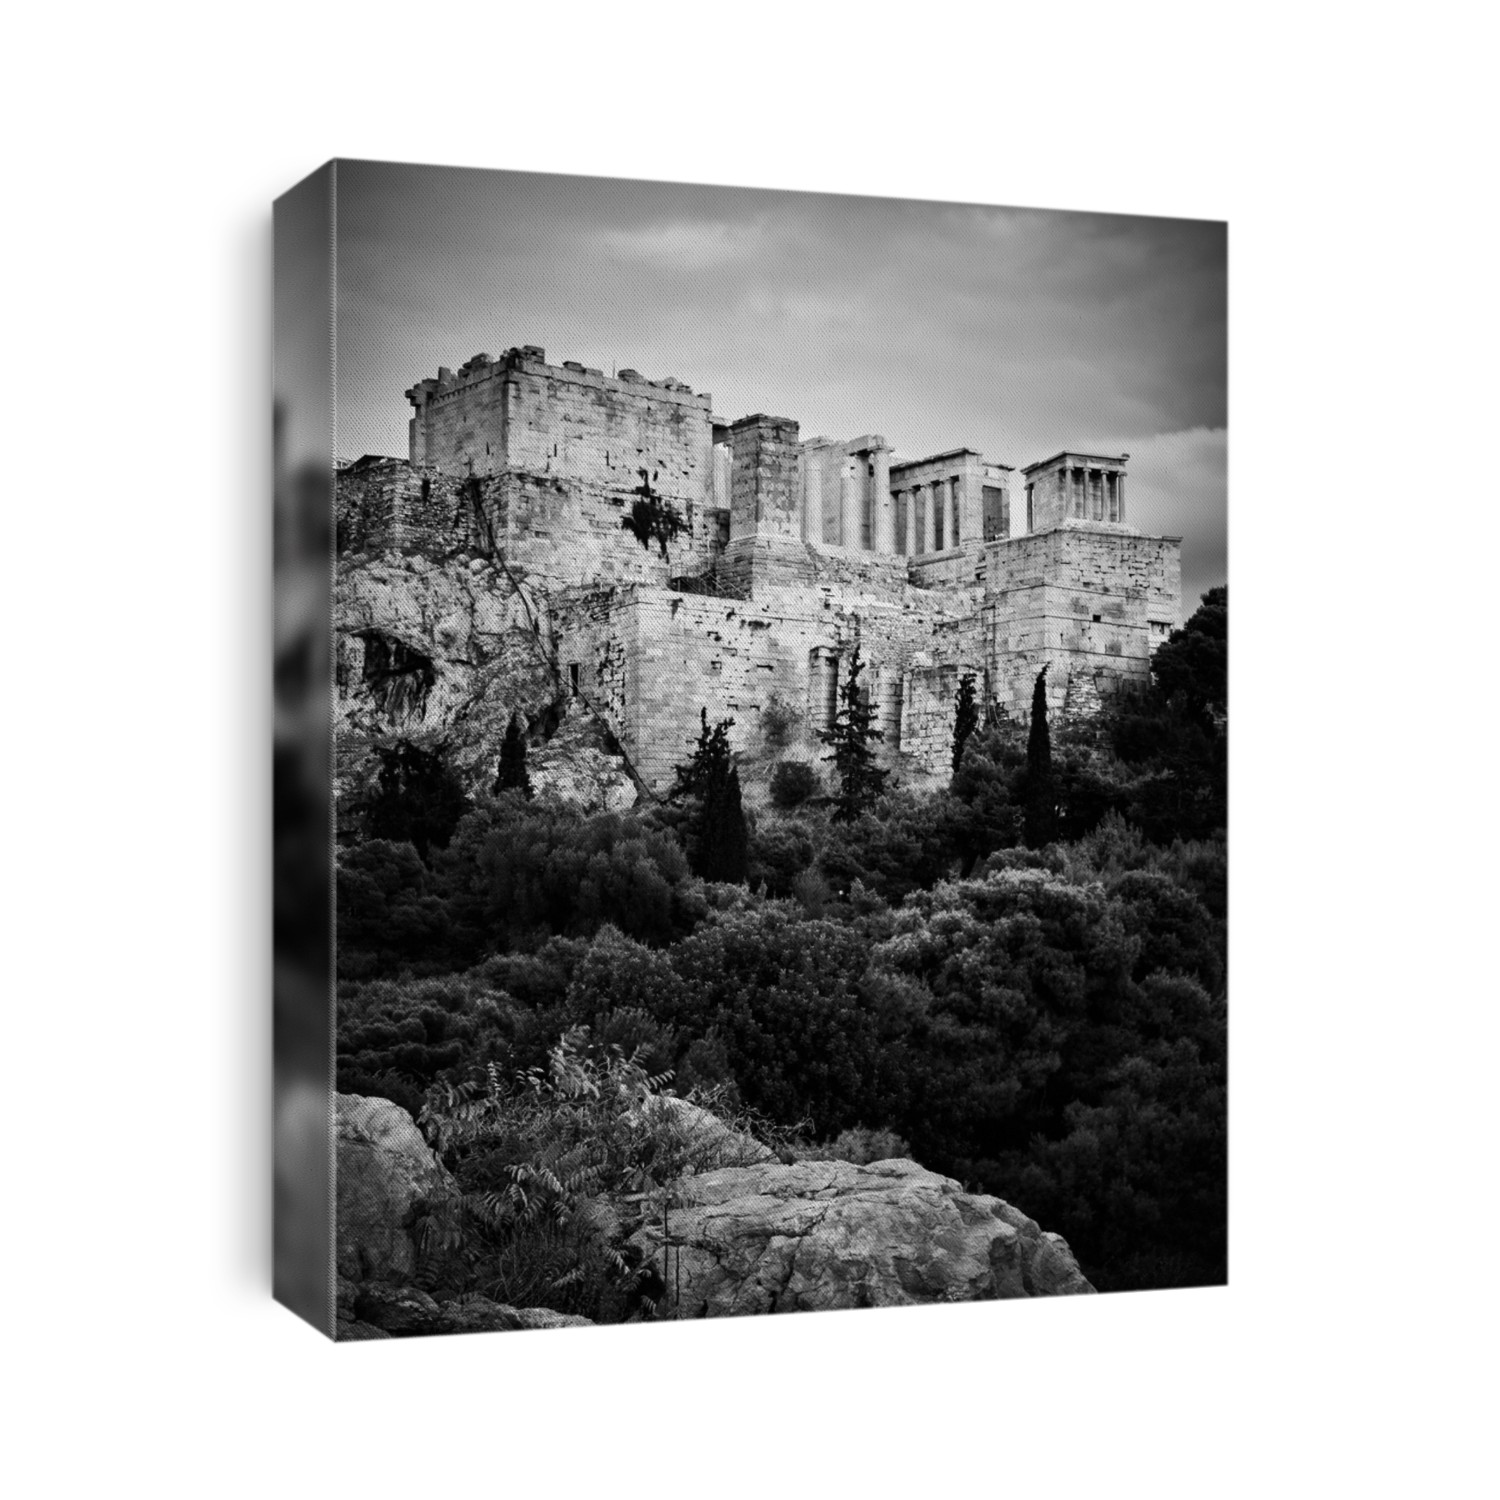 The Acropolis hill in Athens, Greece. Black and white photography, cityscape